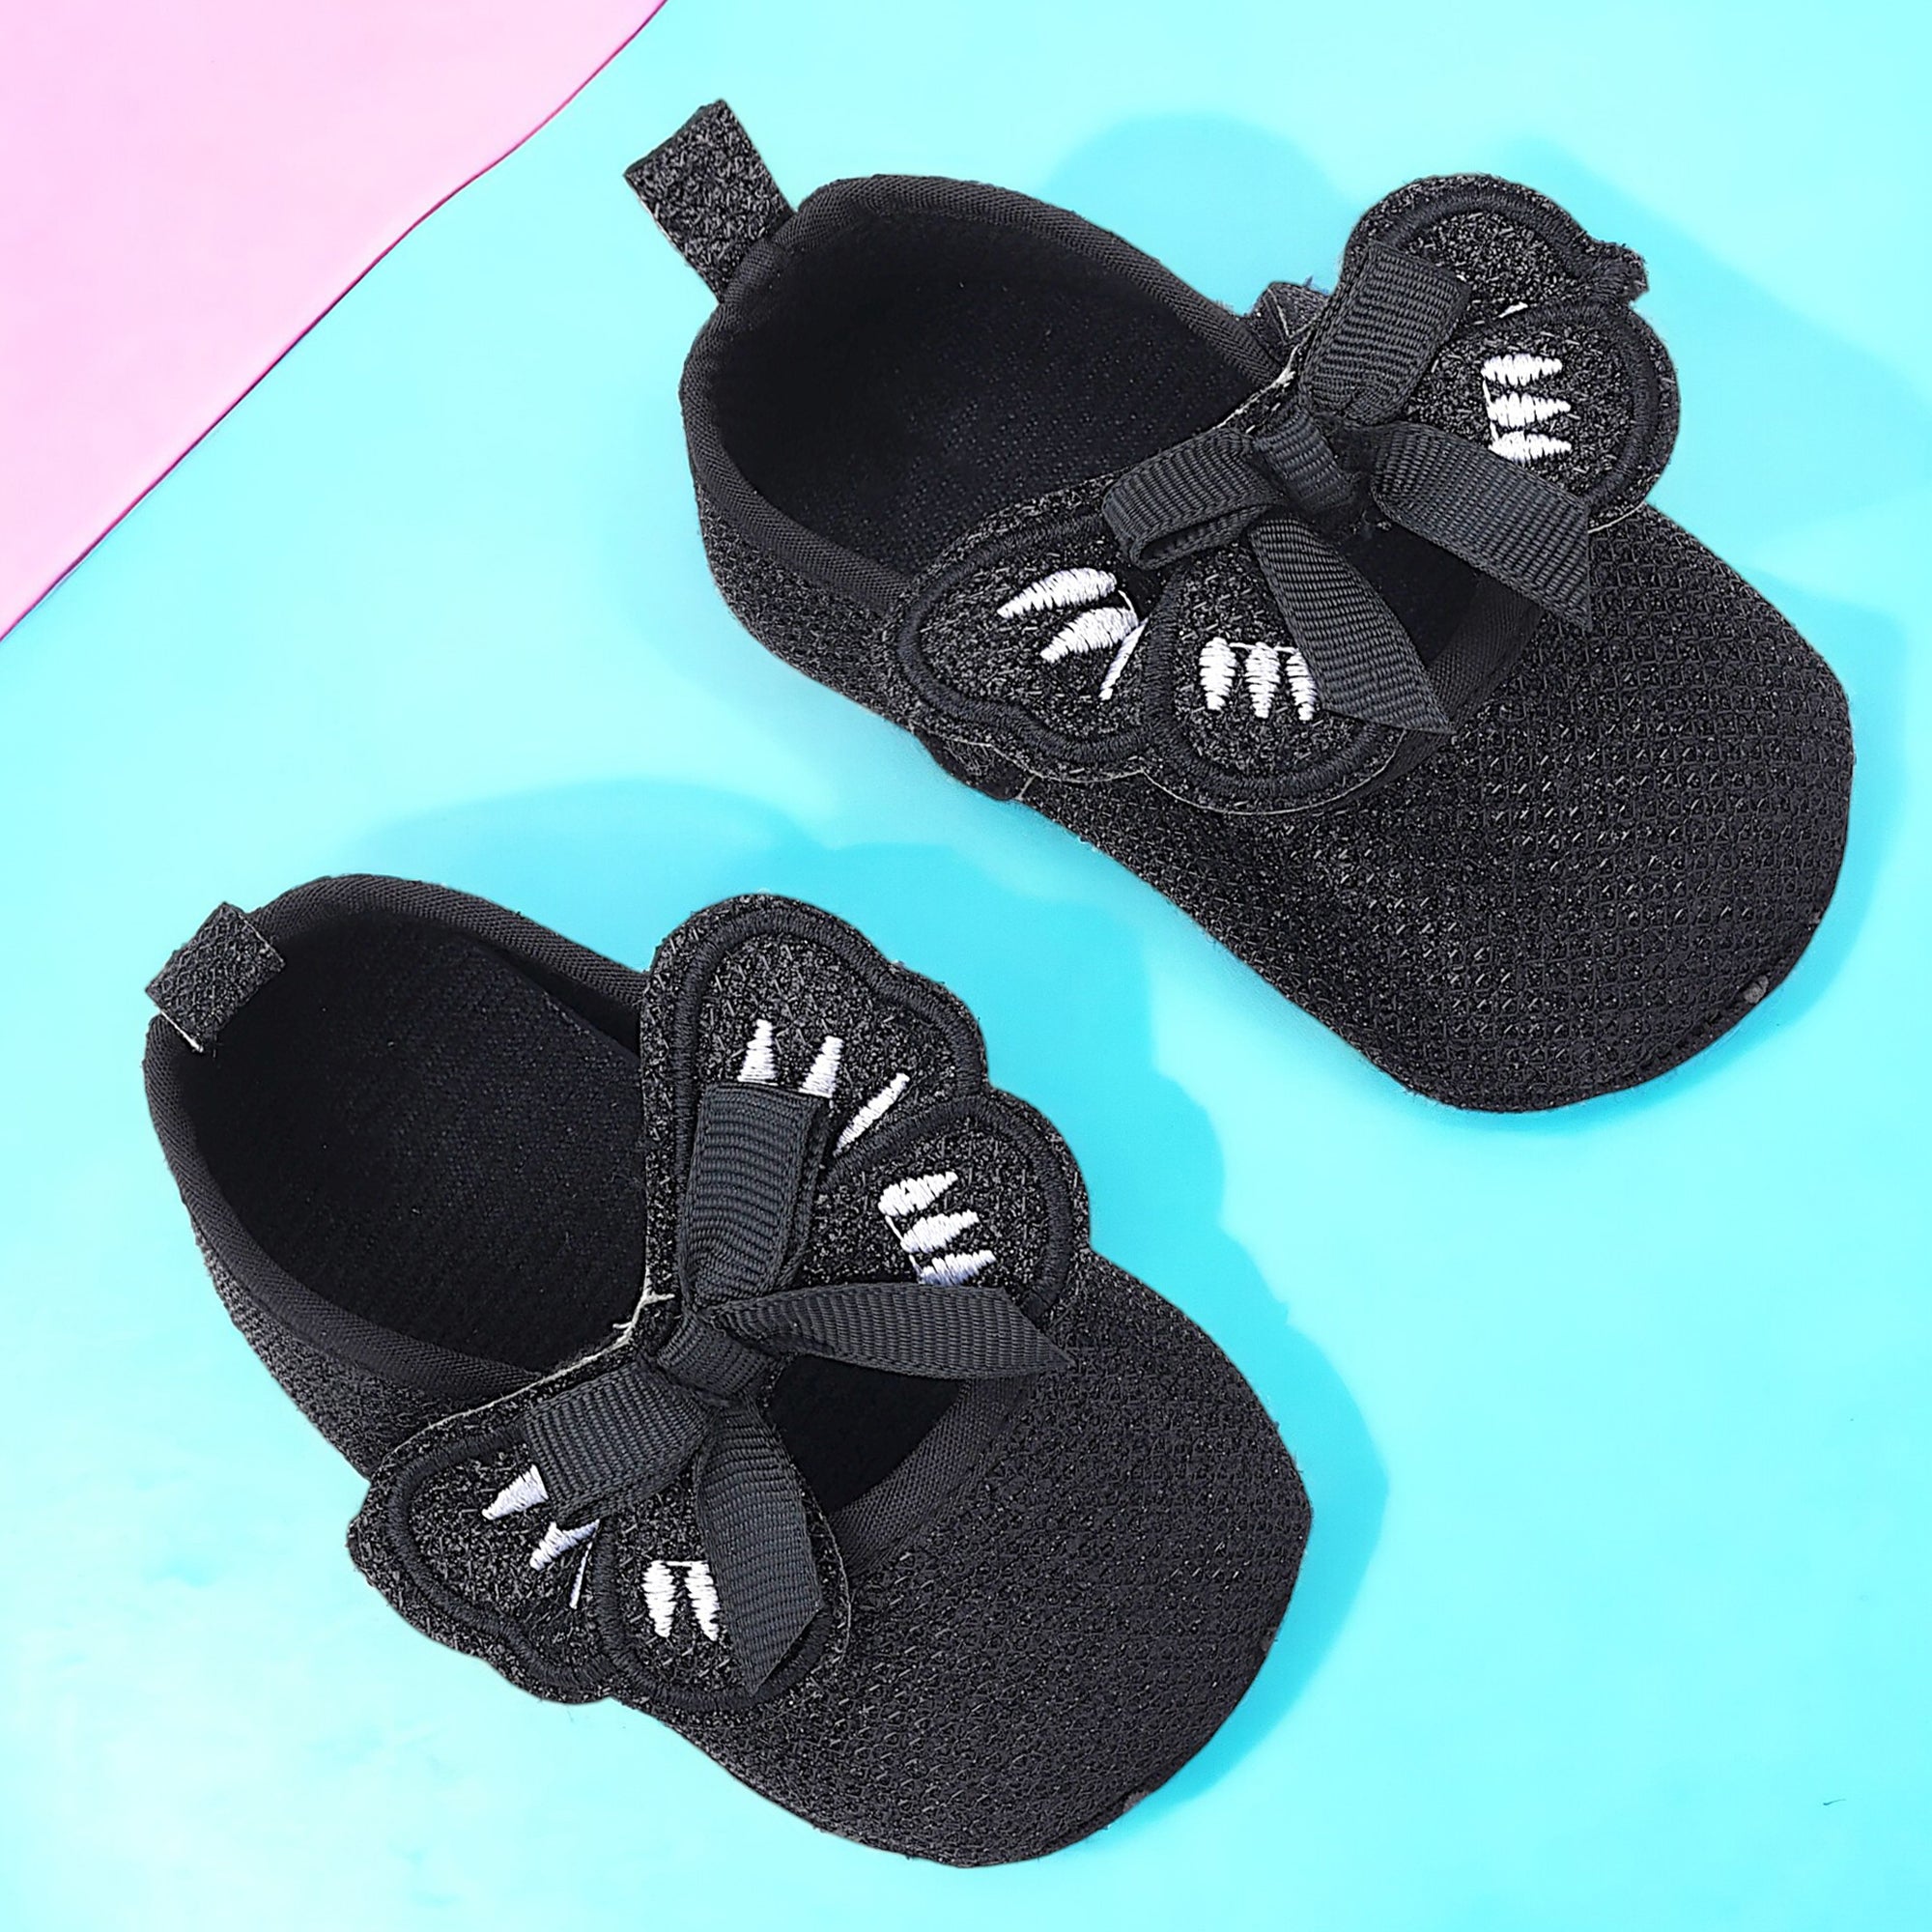 Baby Moo Butterfly Bow Shiny Party Anti-Skid Ballerina Booties - Black